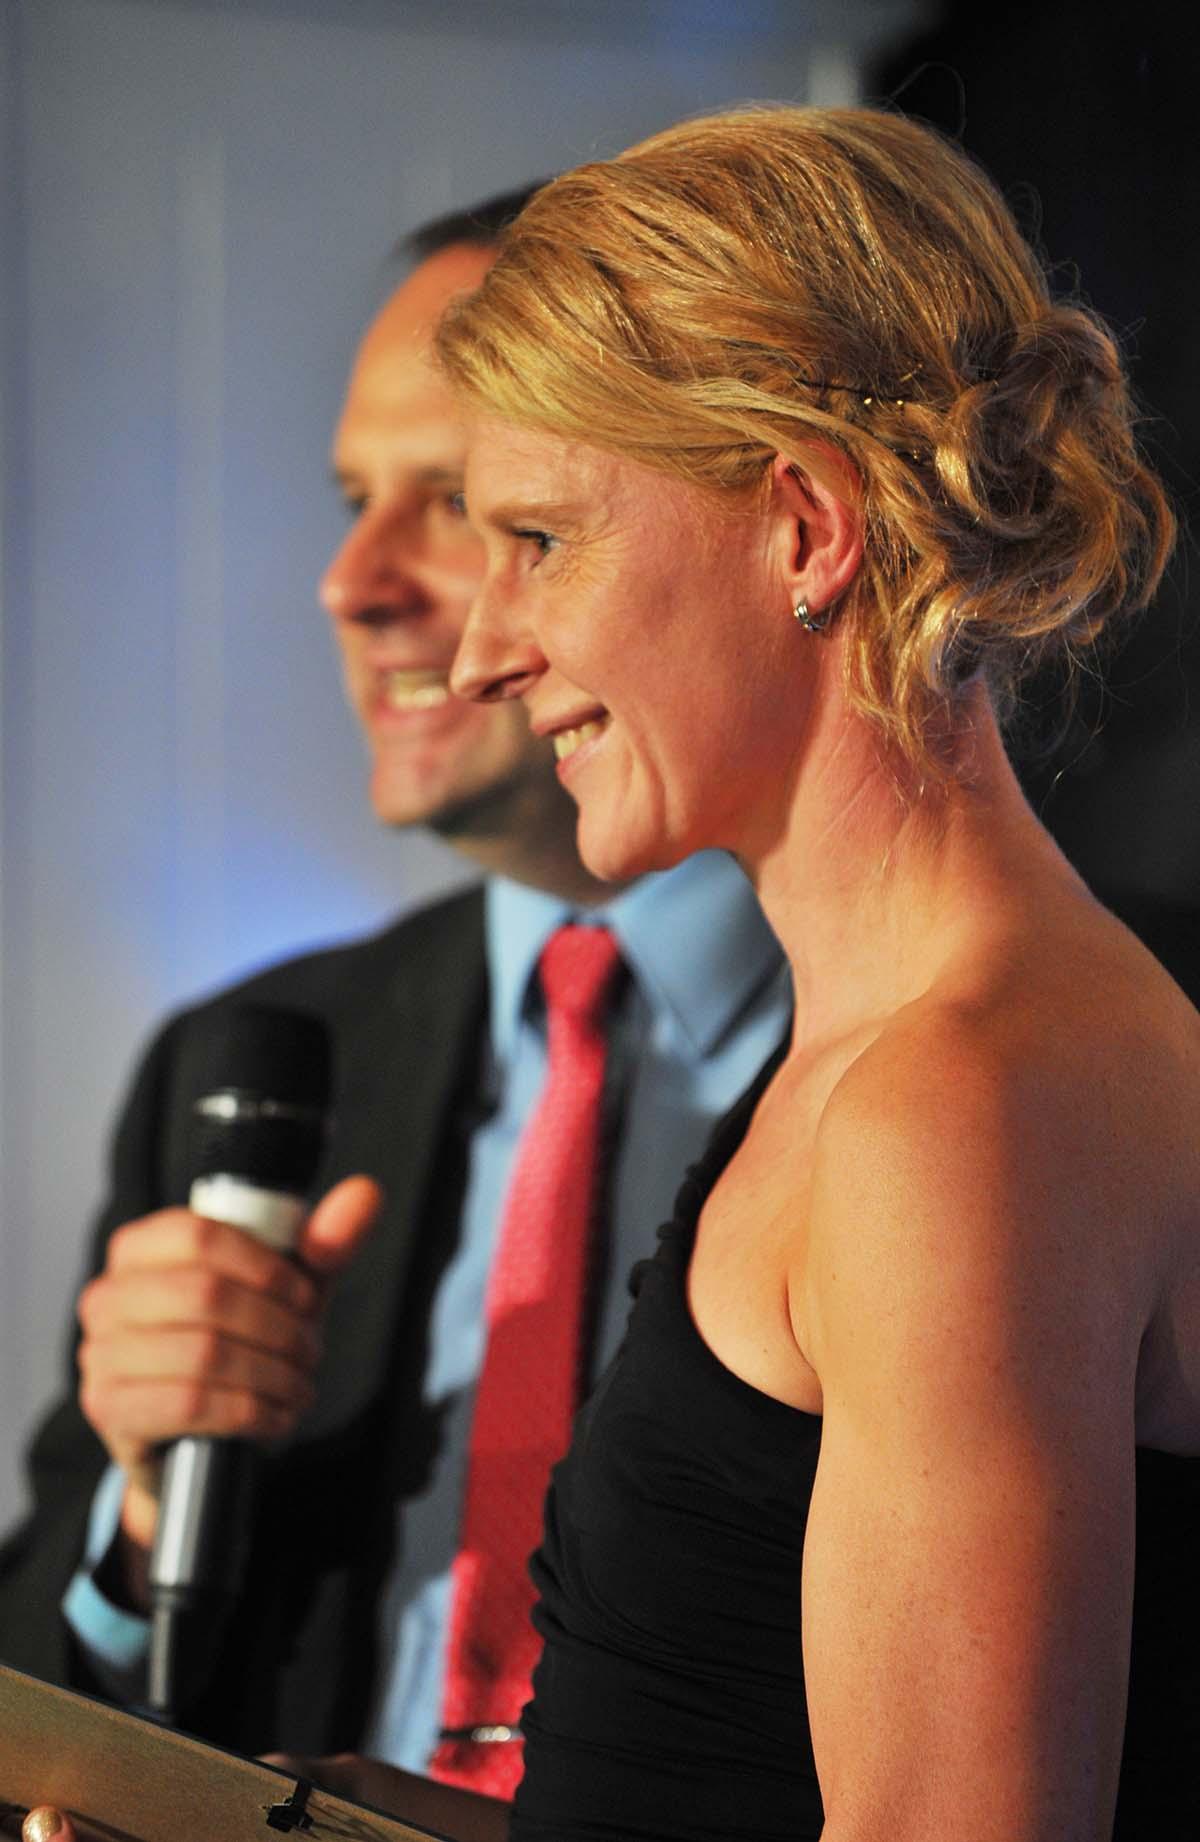 Pictured accepting her award is the Sportswoman of the Year, Janette Cardy (Aquathon).
